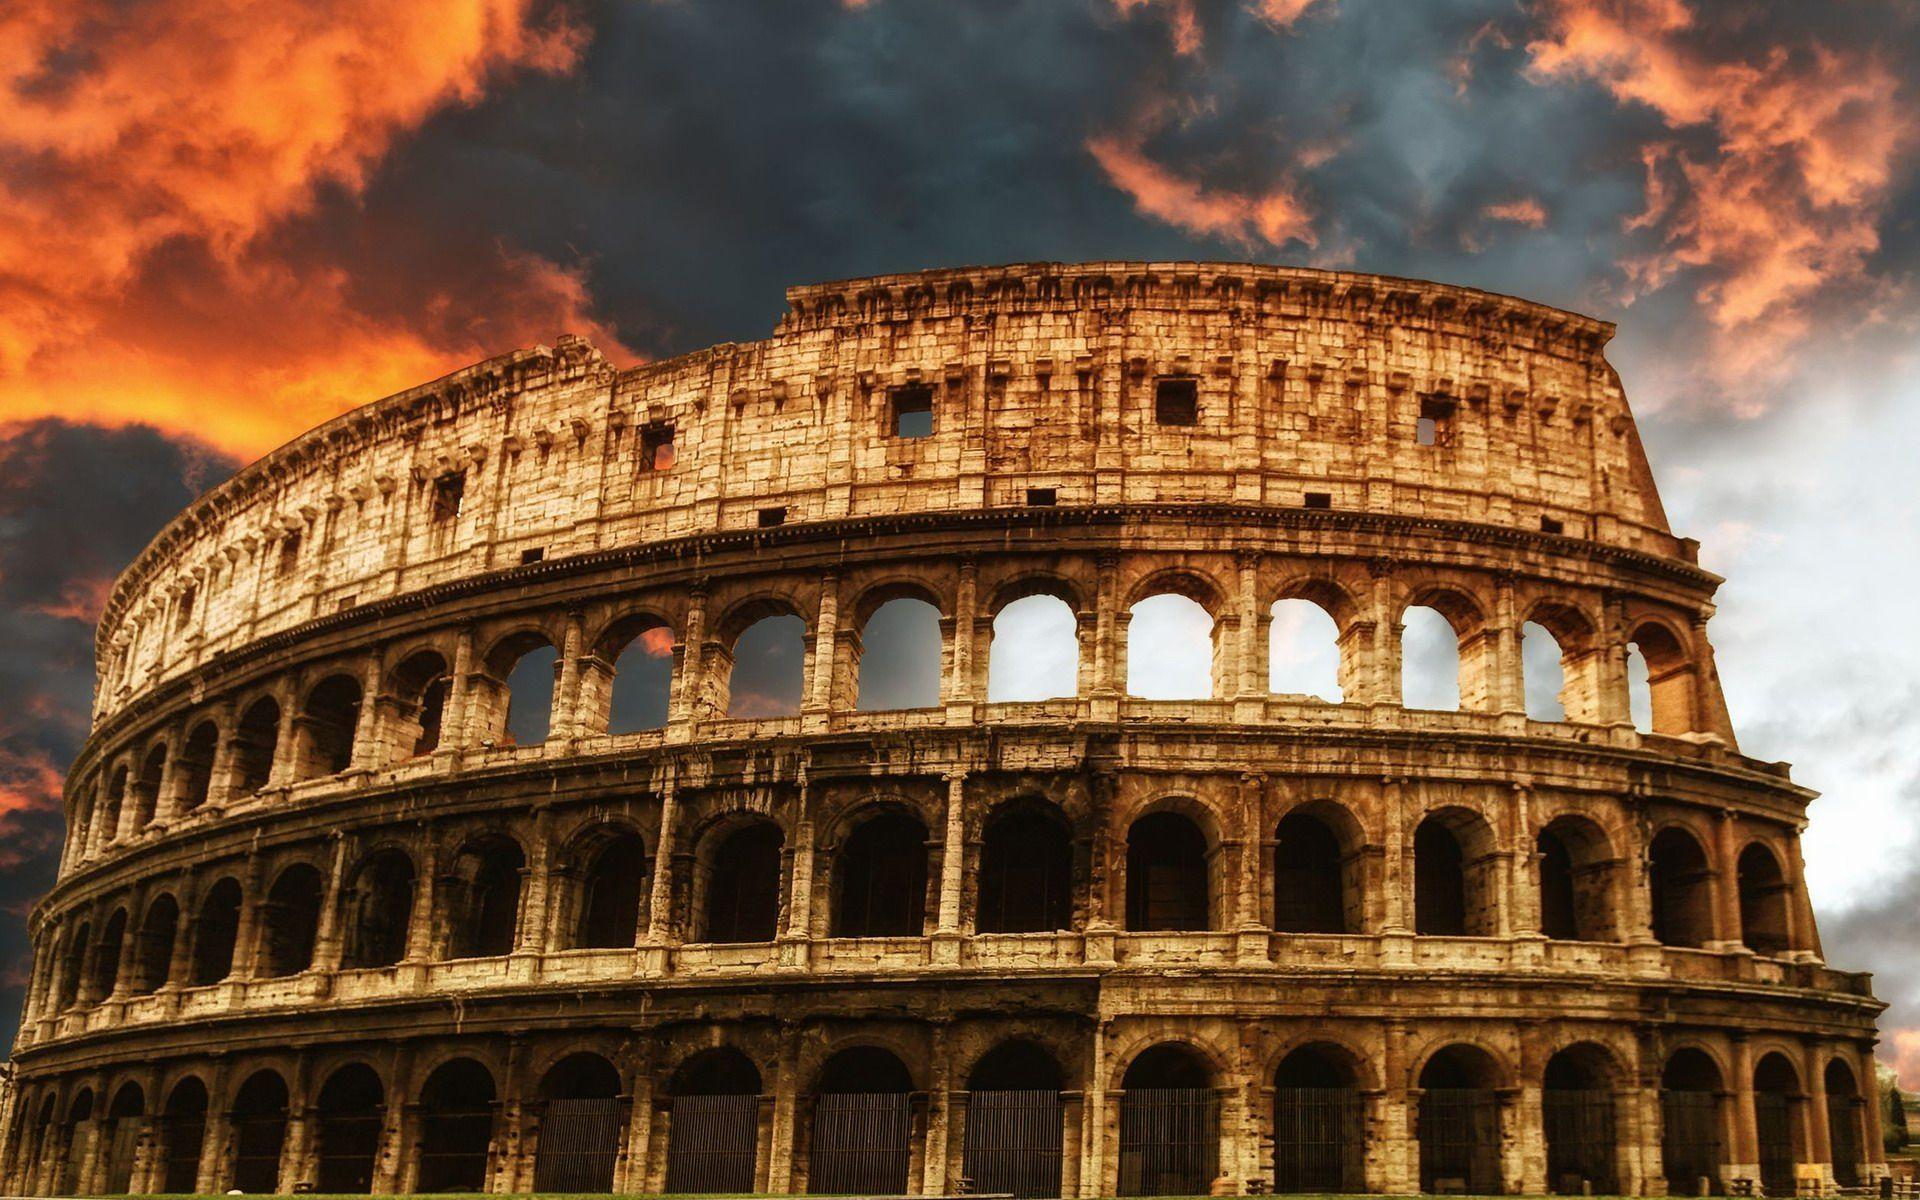 Explore the Colosseum in Rome, Italy. My Bucket List